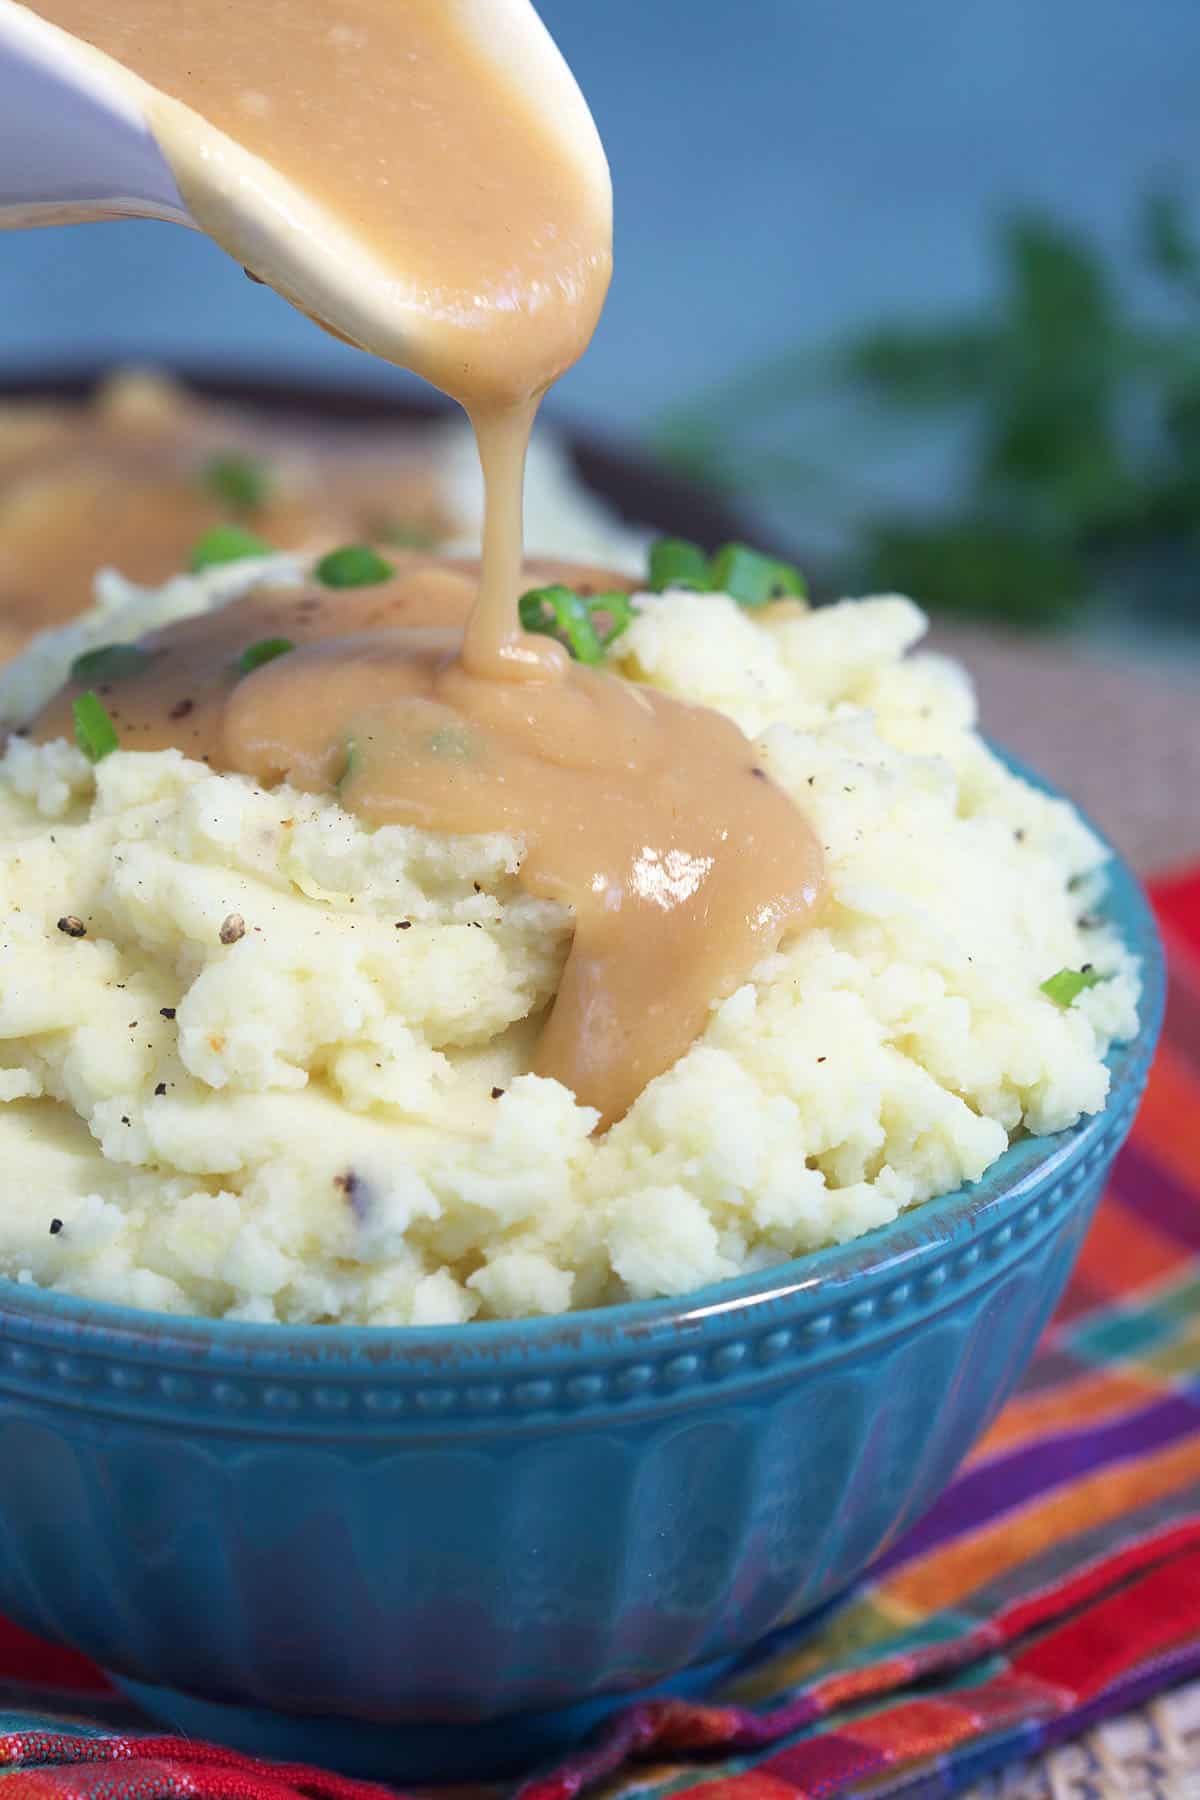 Gravy is being poured on top of mashed potatoes.